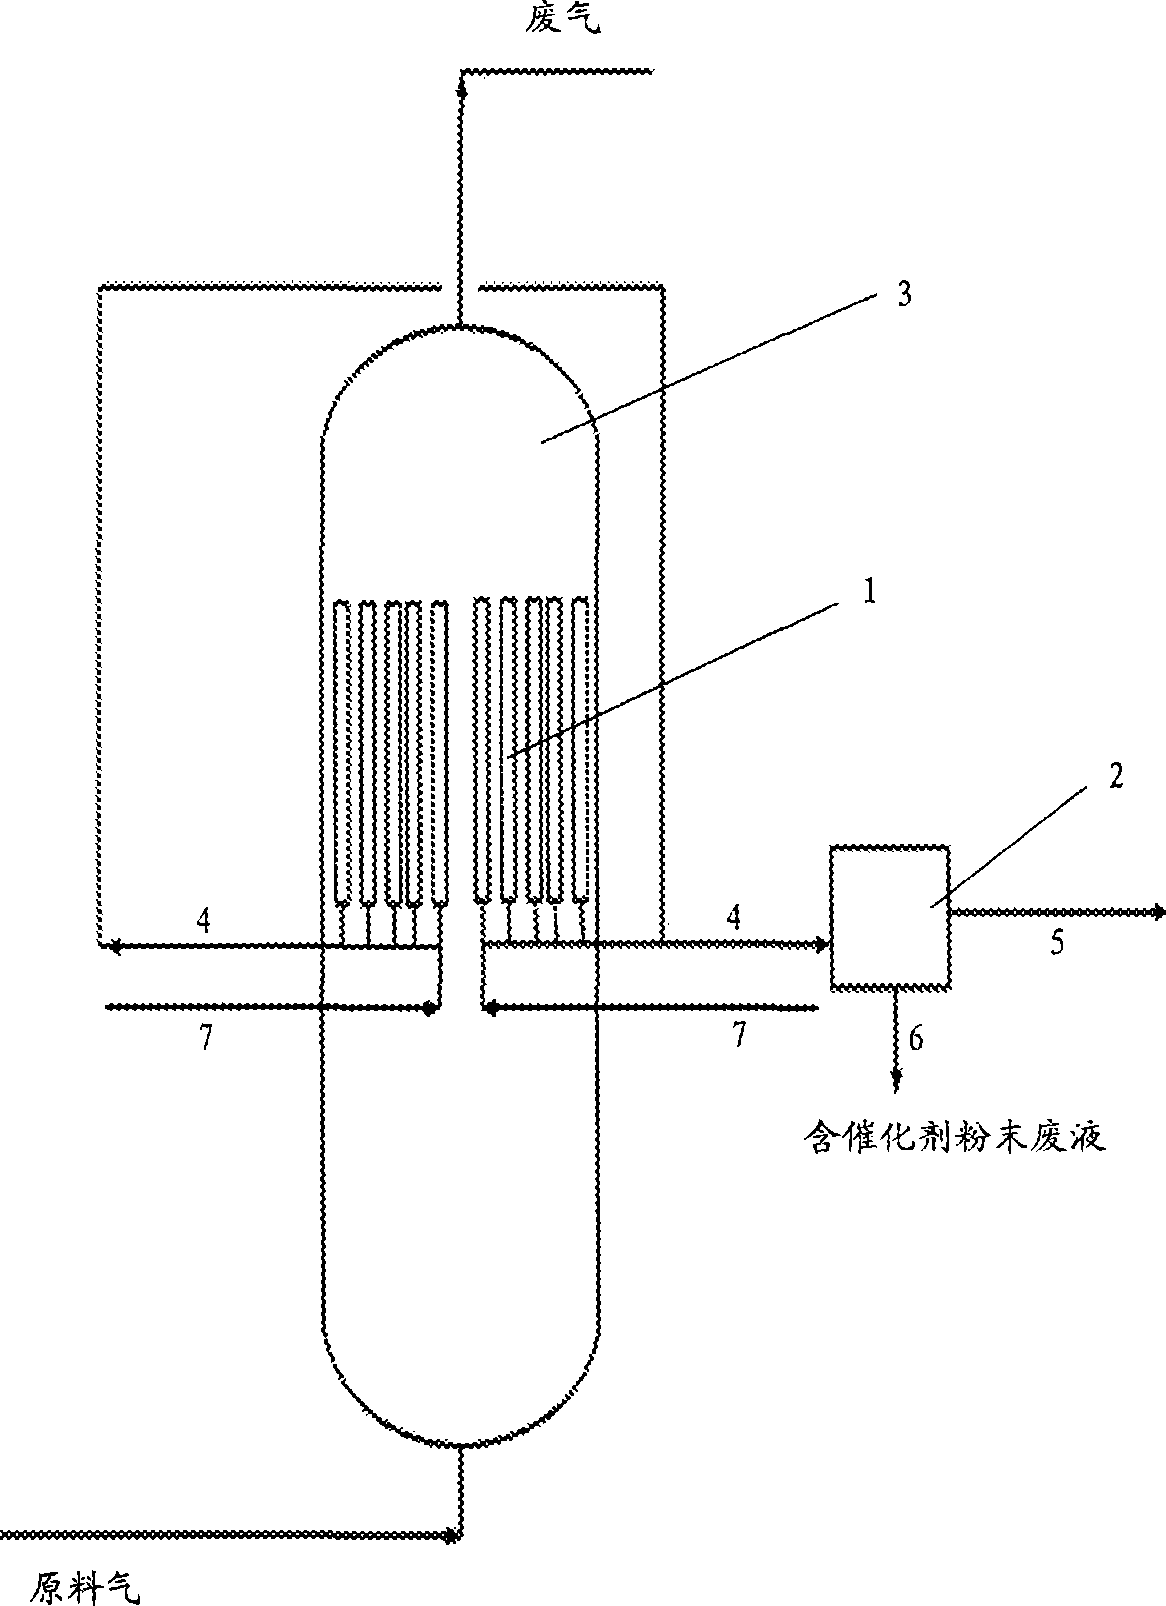 Extraction method of heavy fraction of ft synthetic product from slurry bed reactor